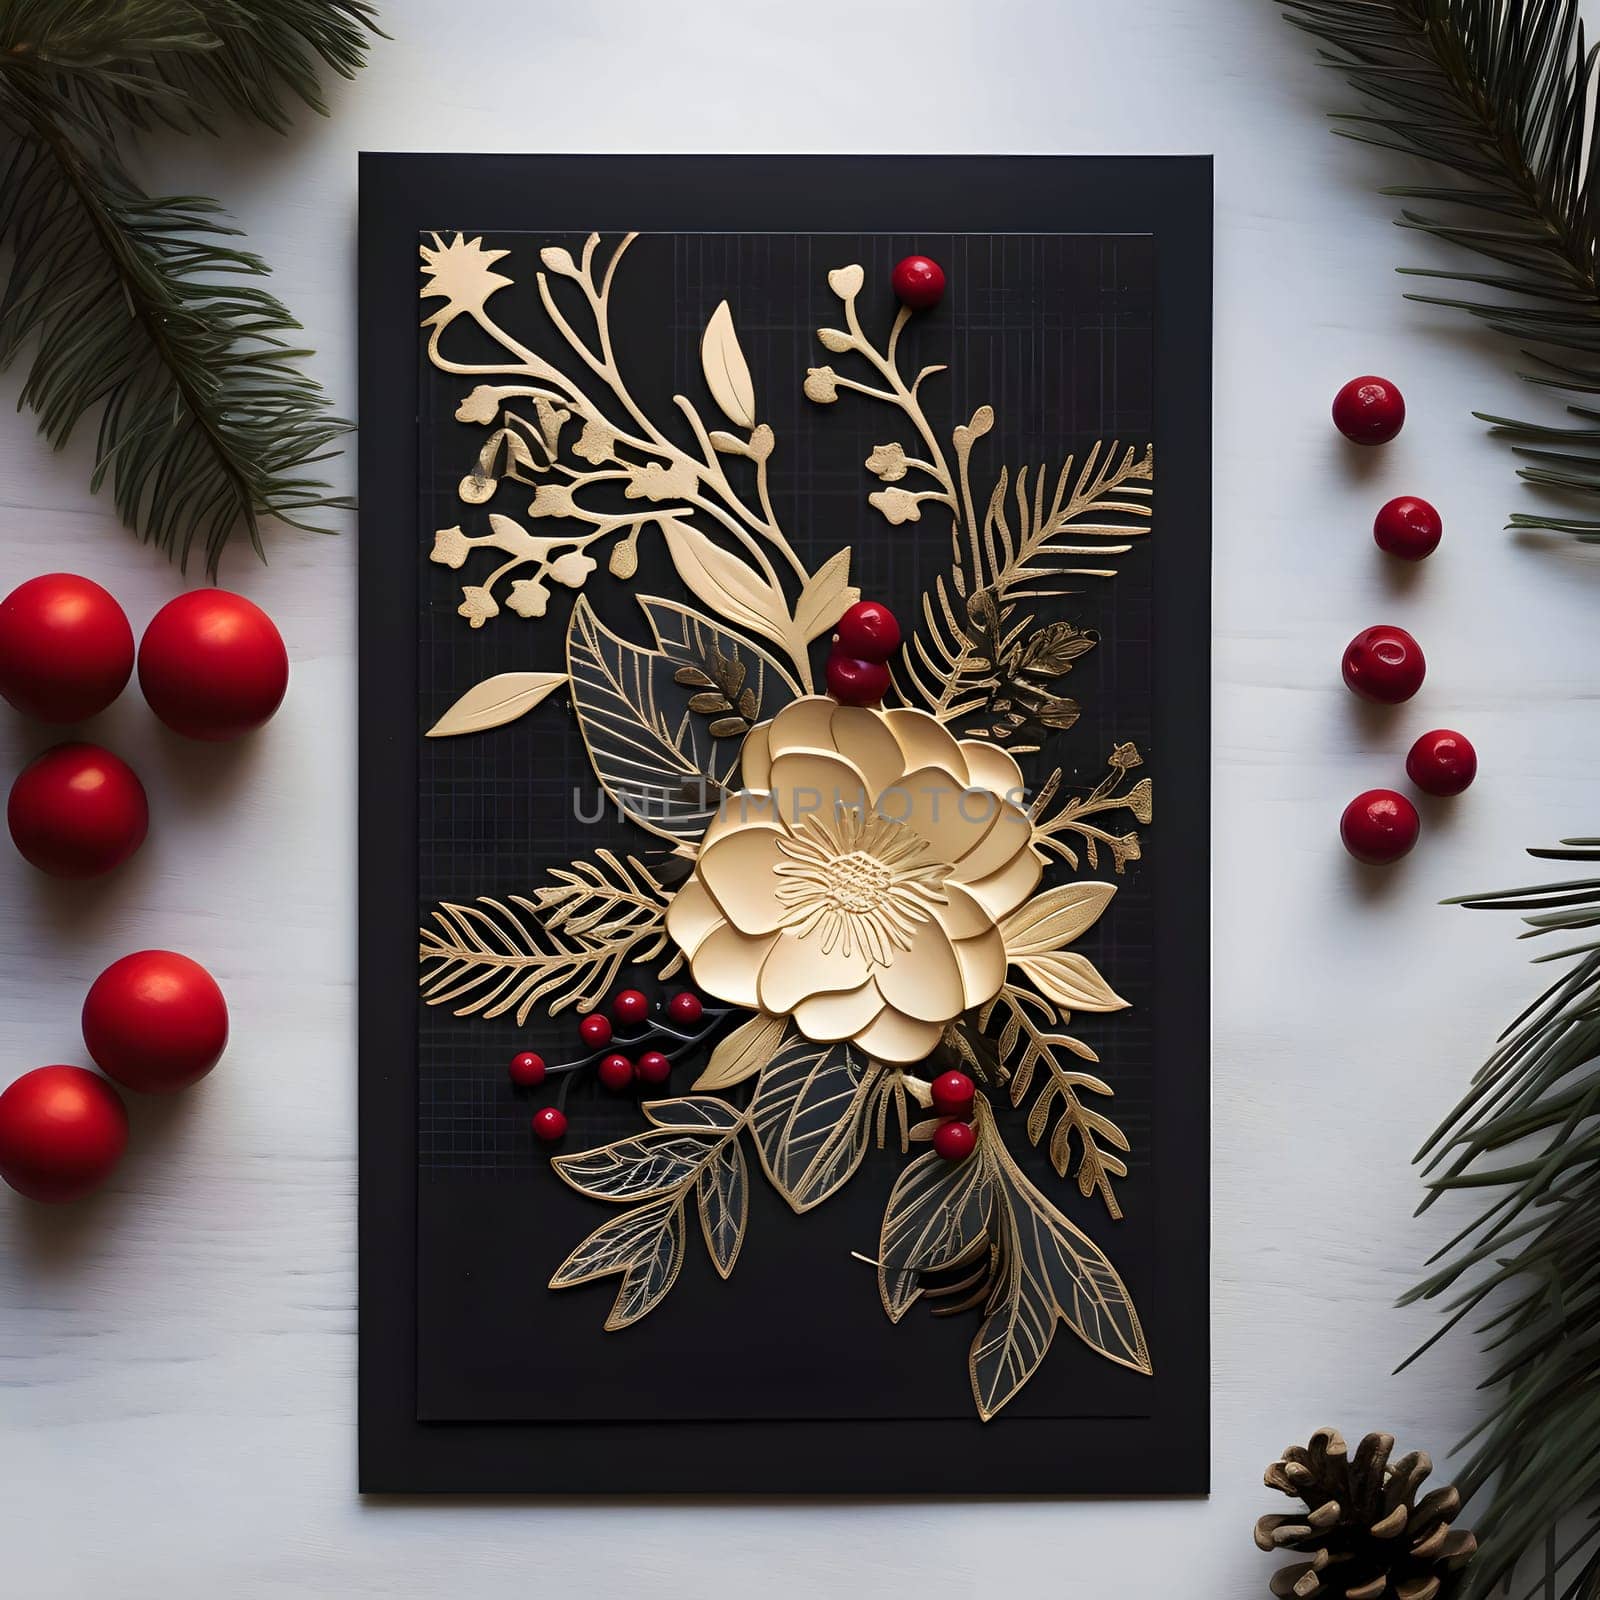 Dark card with handmade gold leaf flower and sprigs of conifers around red rowan ornament. Christmas card as a symbol of remembrance of the birth of the Savior. A time of joy and celebration.